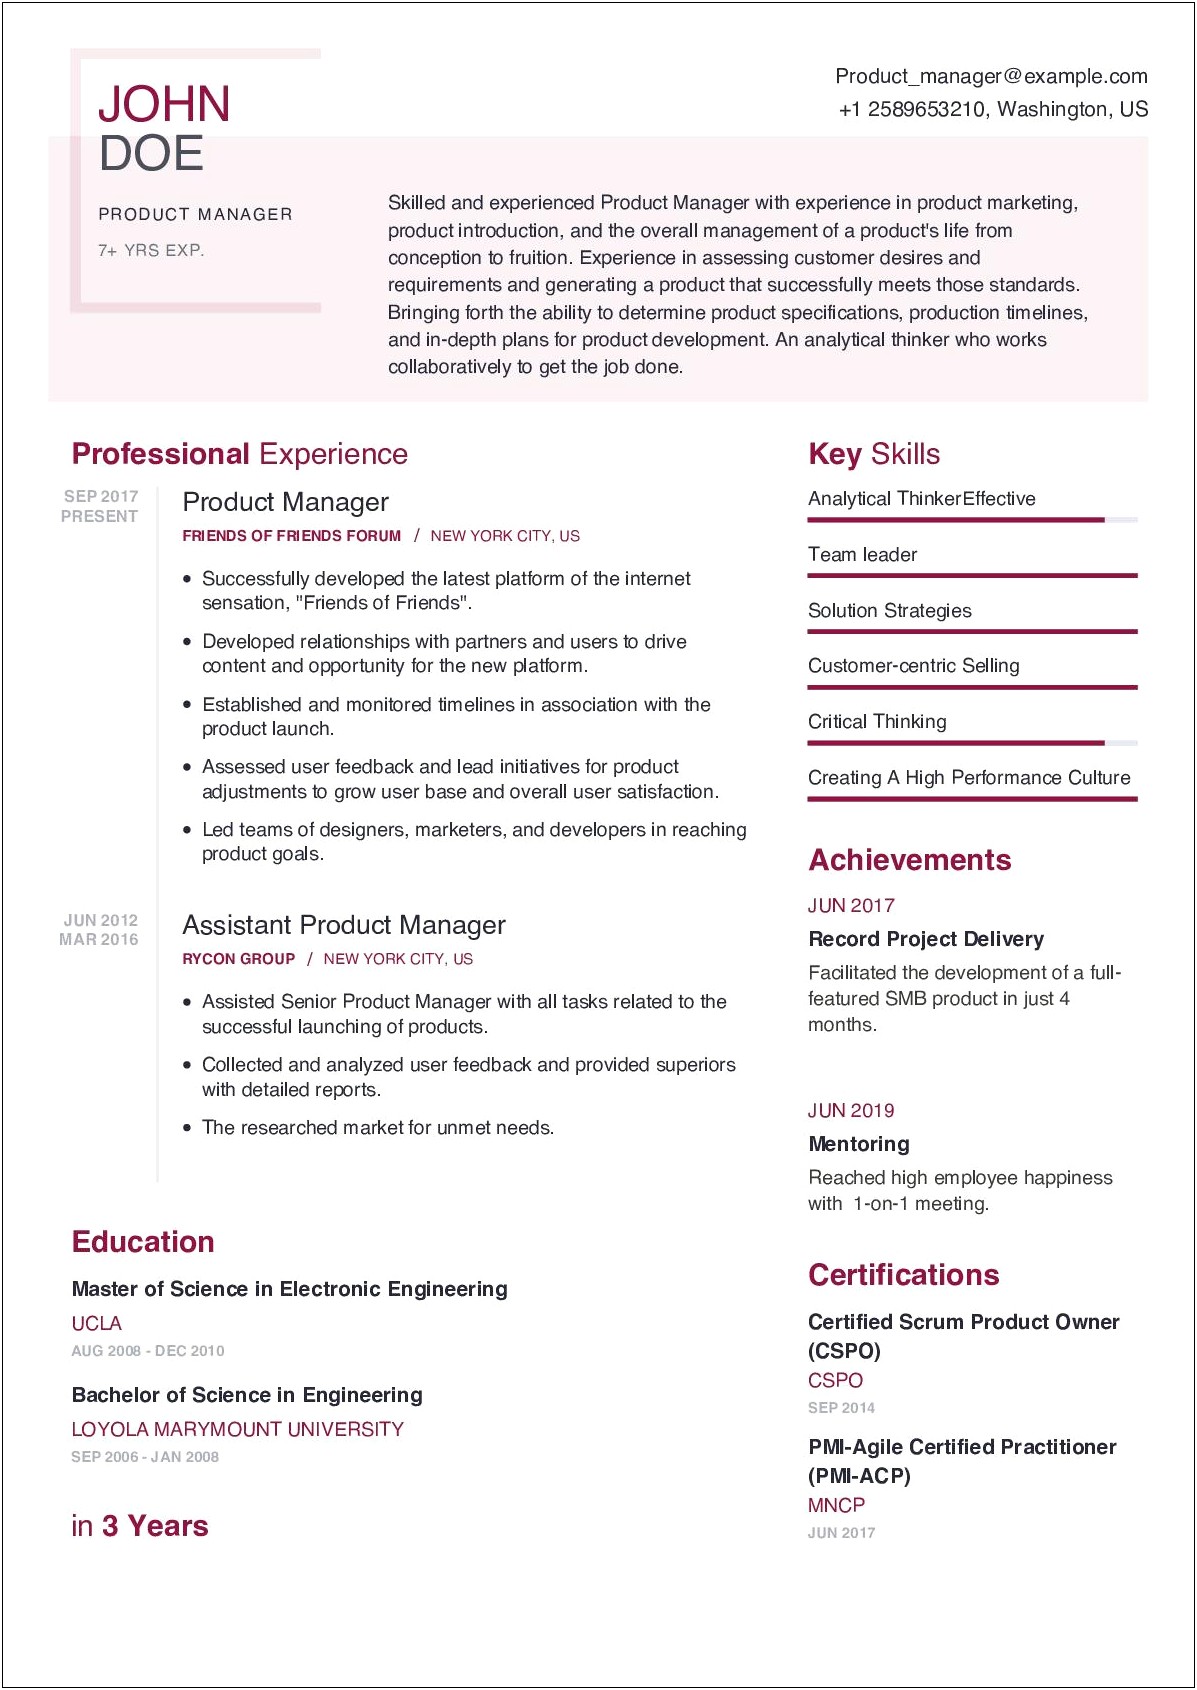 Product Manager Resume With Certification